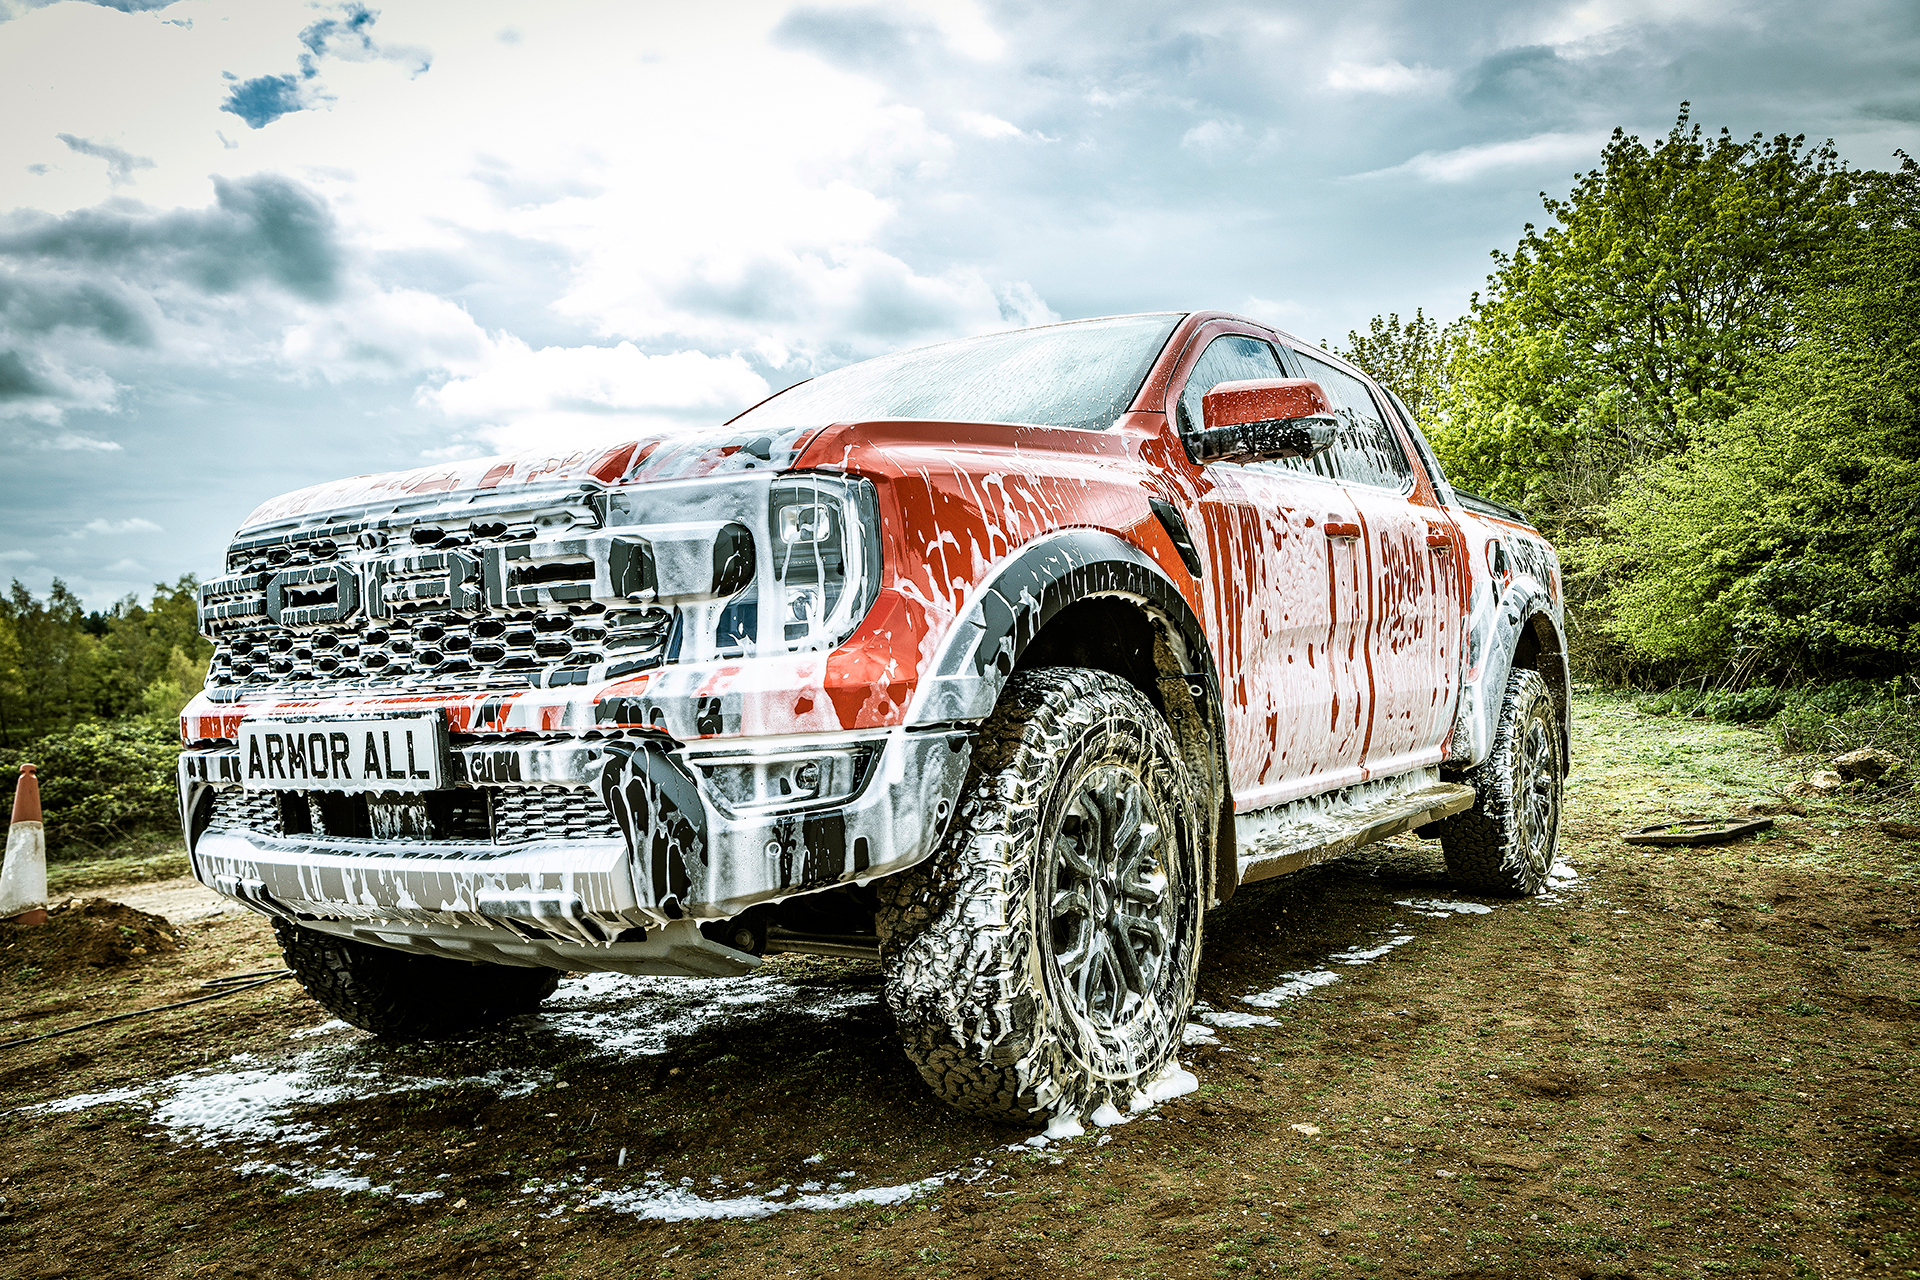 photography of the car half way through washing for armorall uk's advertising campaign